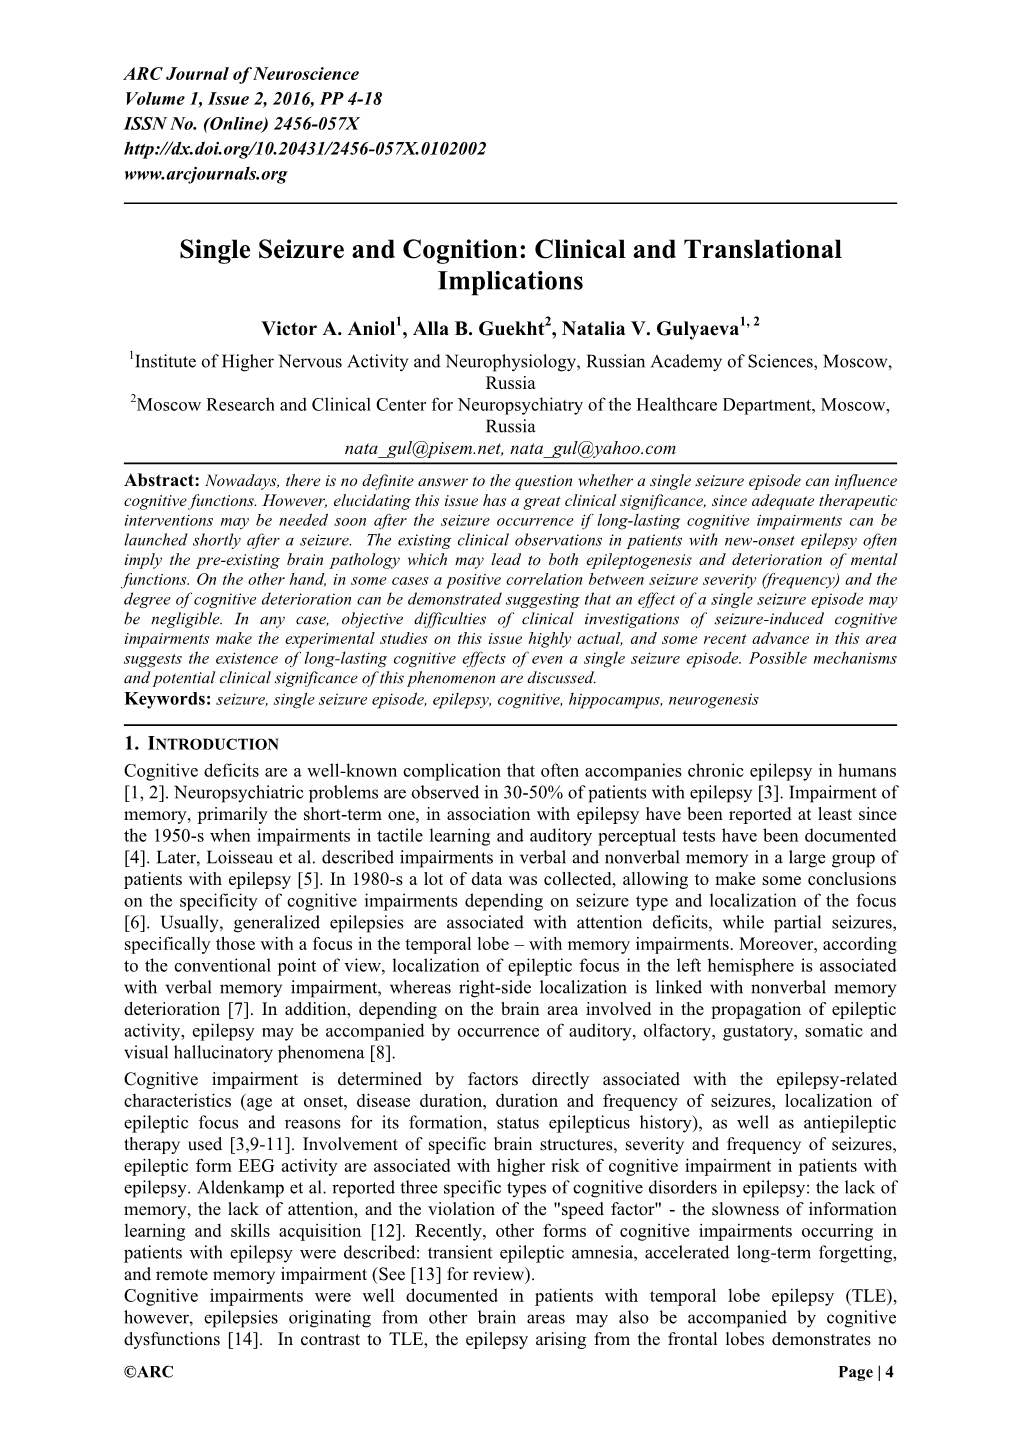 Single Seizure and Cognition: Clinical and Translational Implications